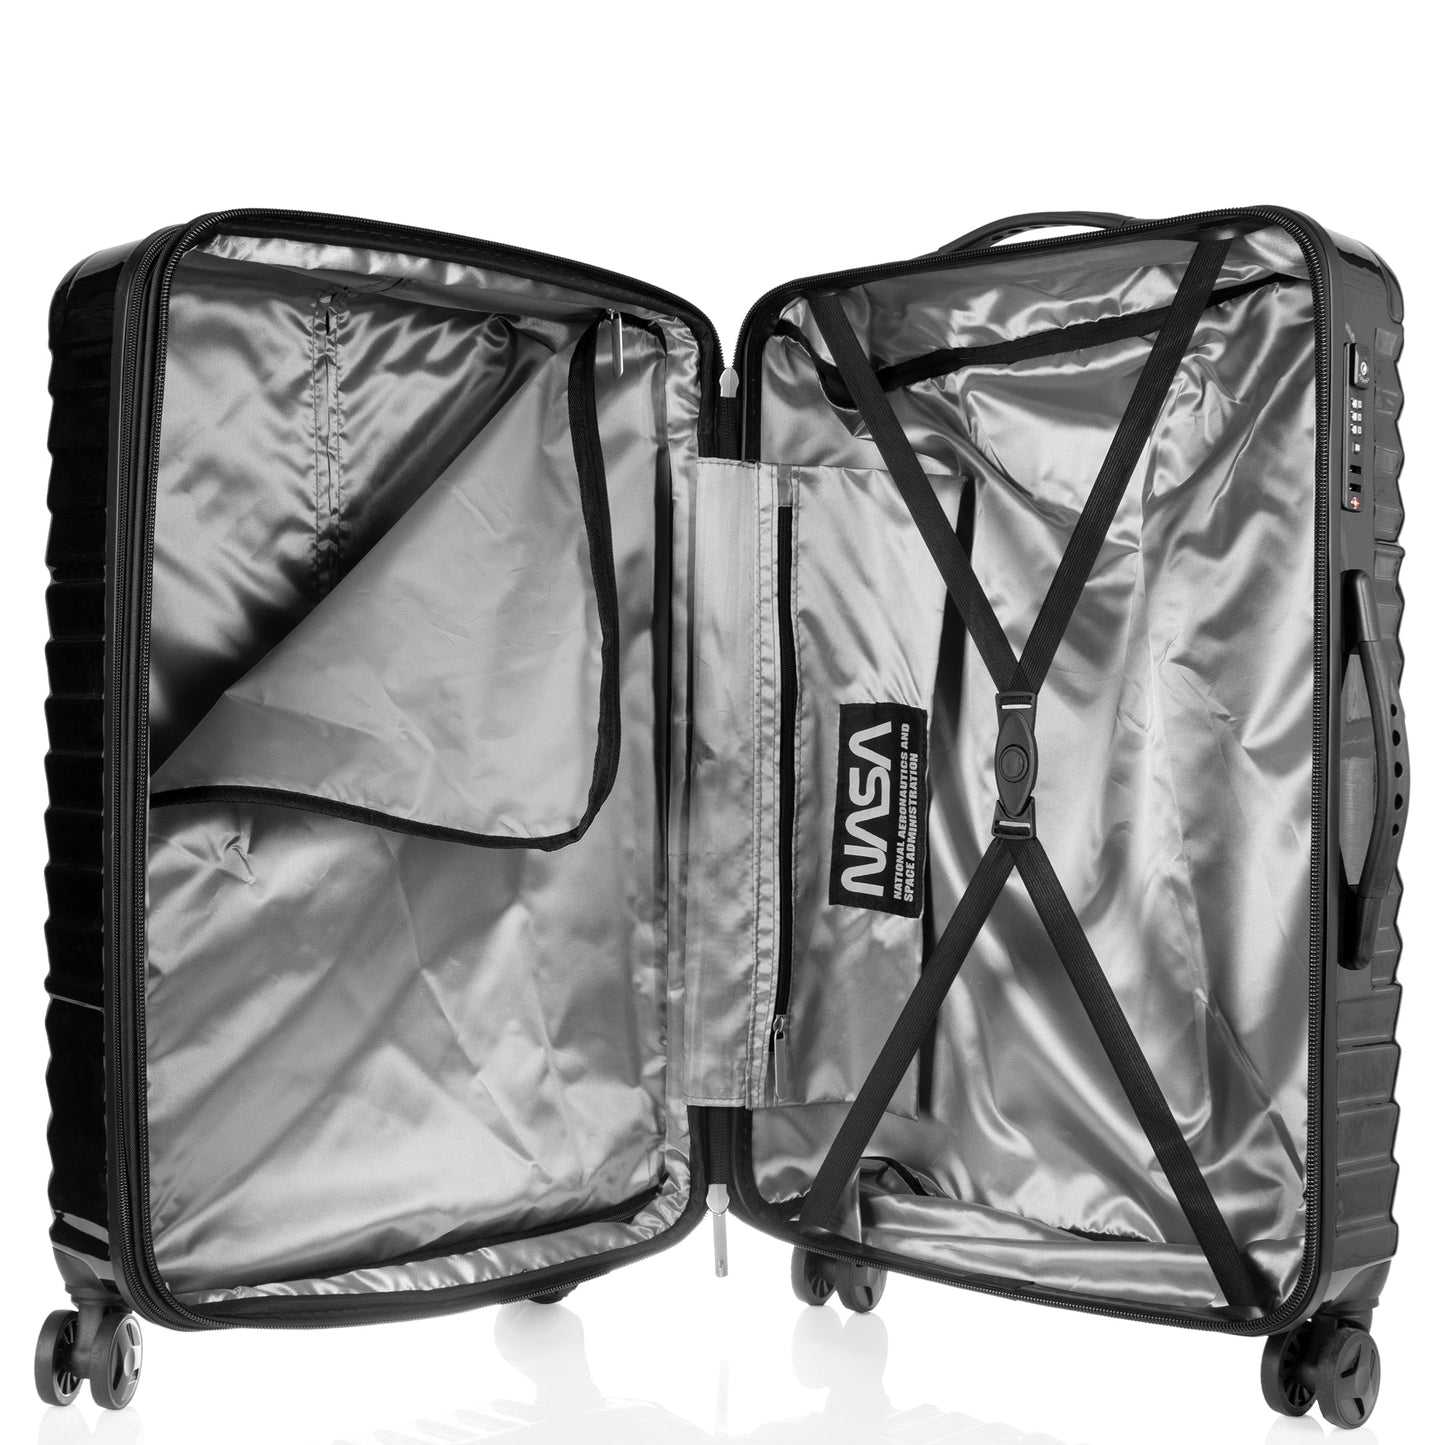 Space Shuttle Collection Black Luggage 3 Piece Set (21/25/29") Suitcase Lock Spinner Hardshell